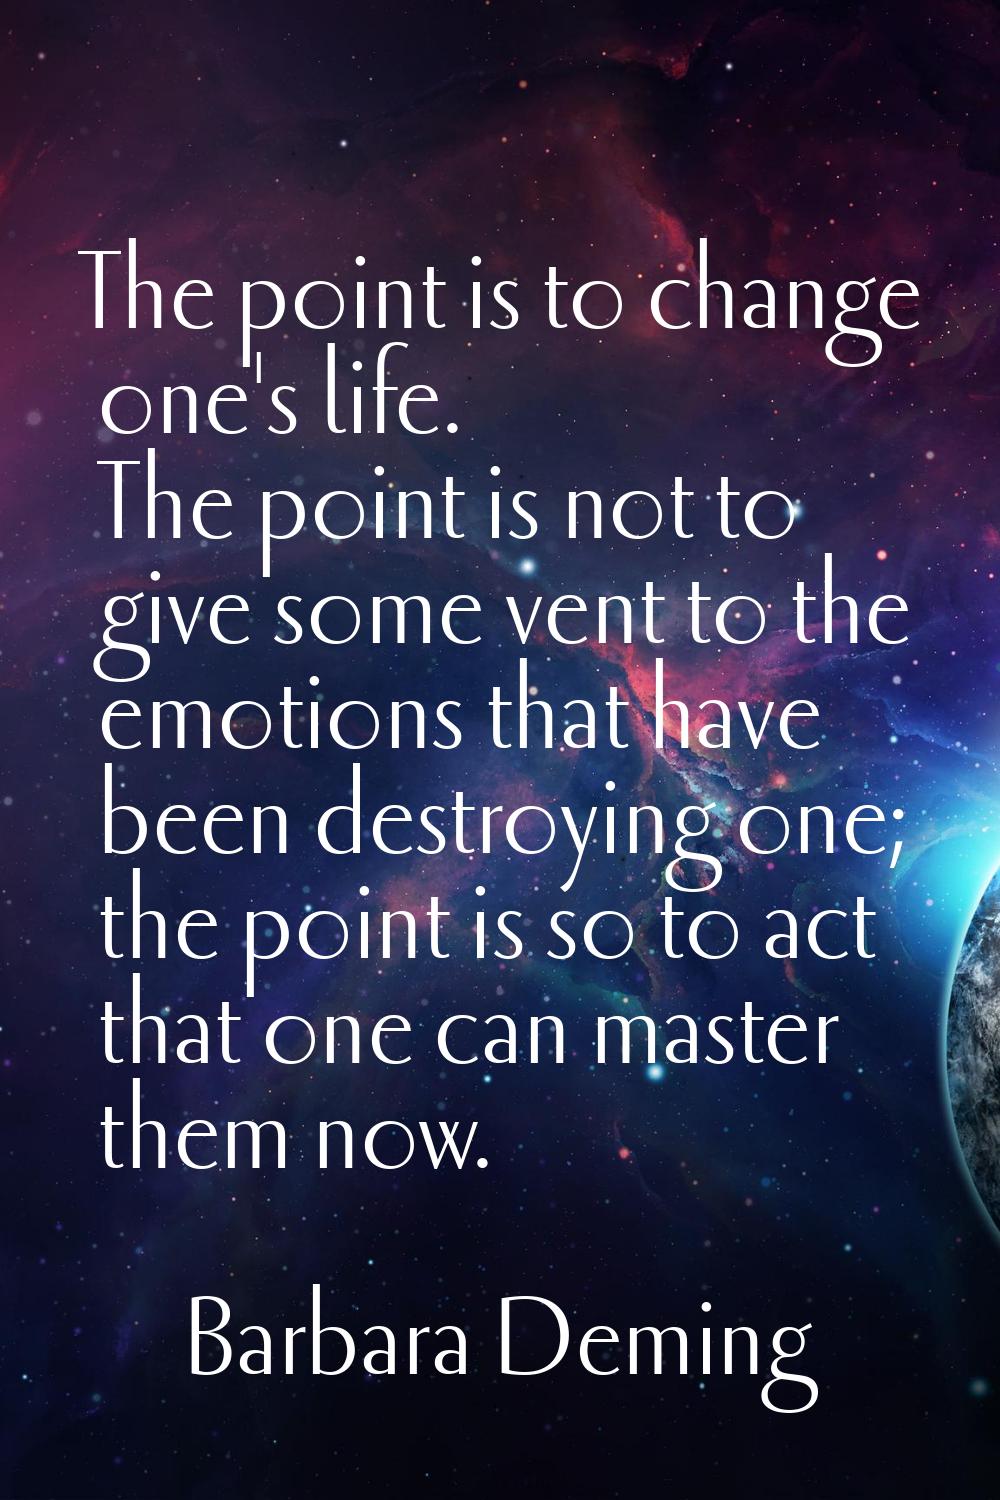 The point is to change one's life. The point is not to give some vent to the emotions that have bee